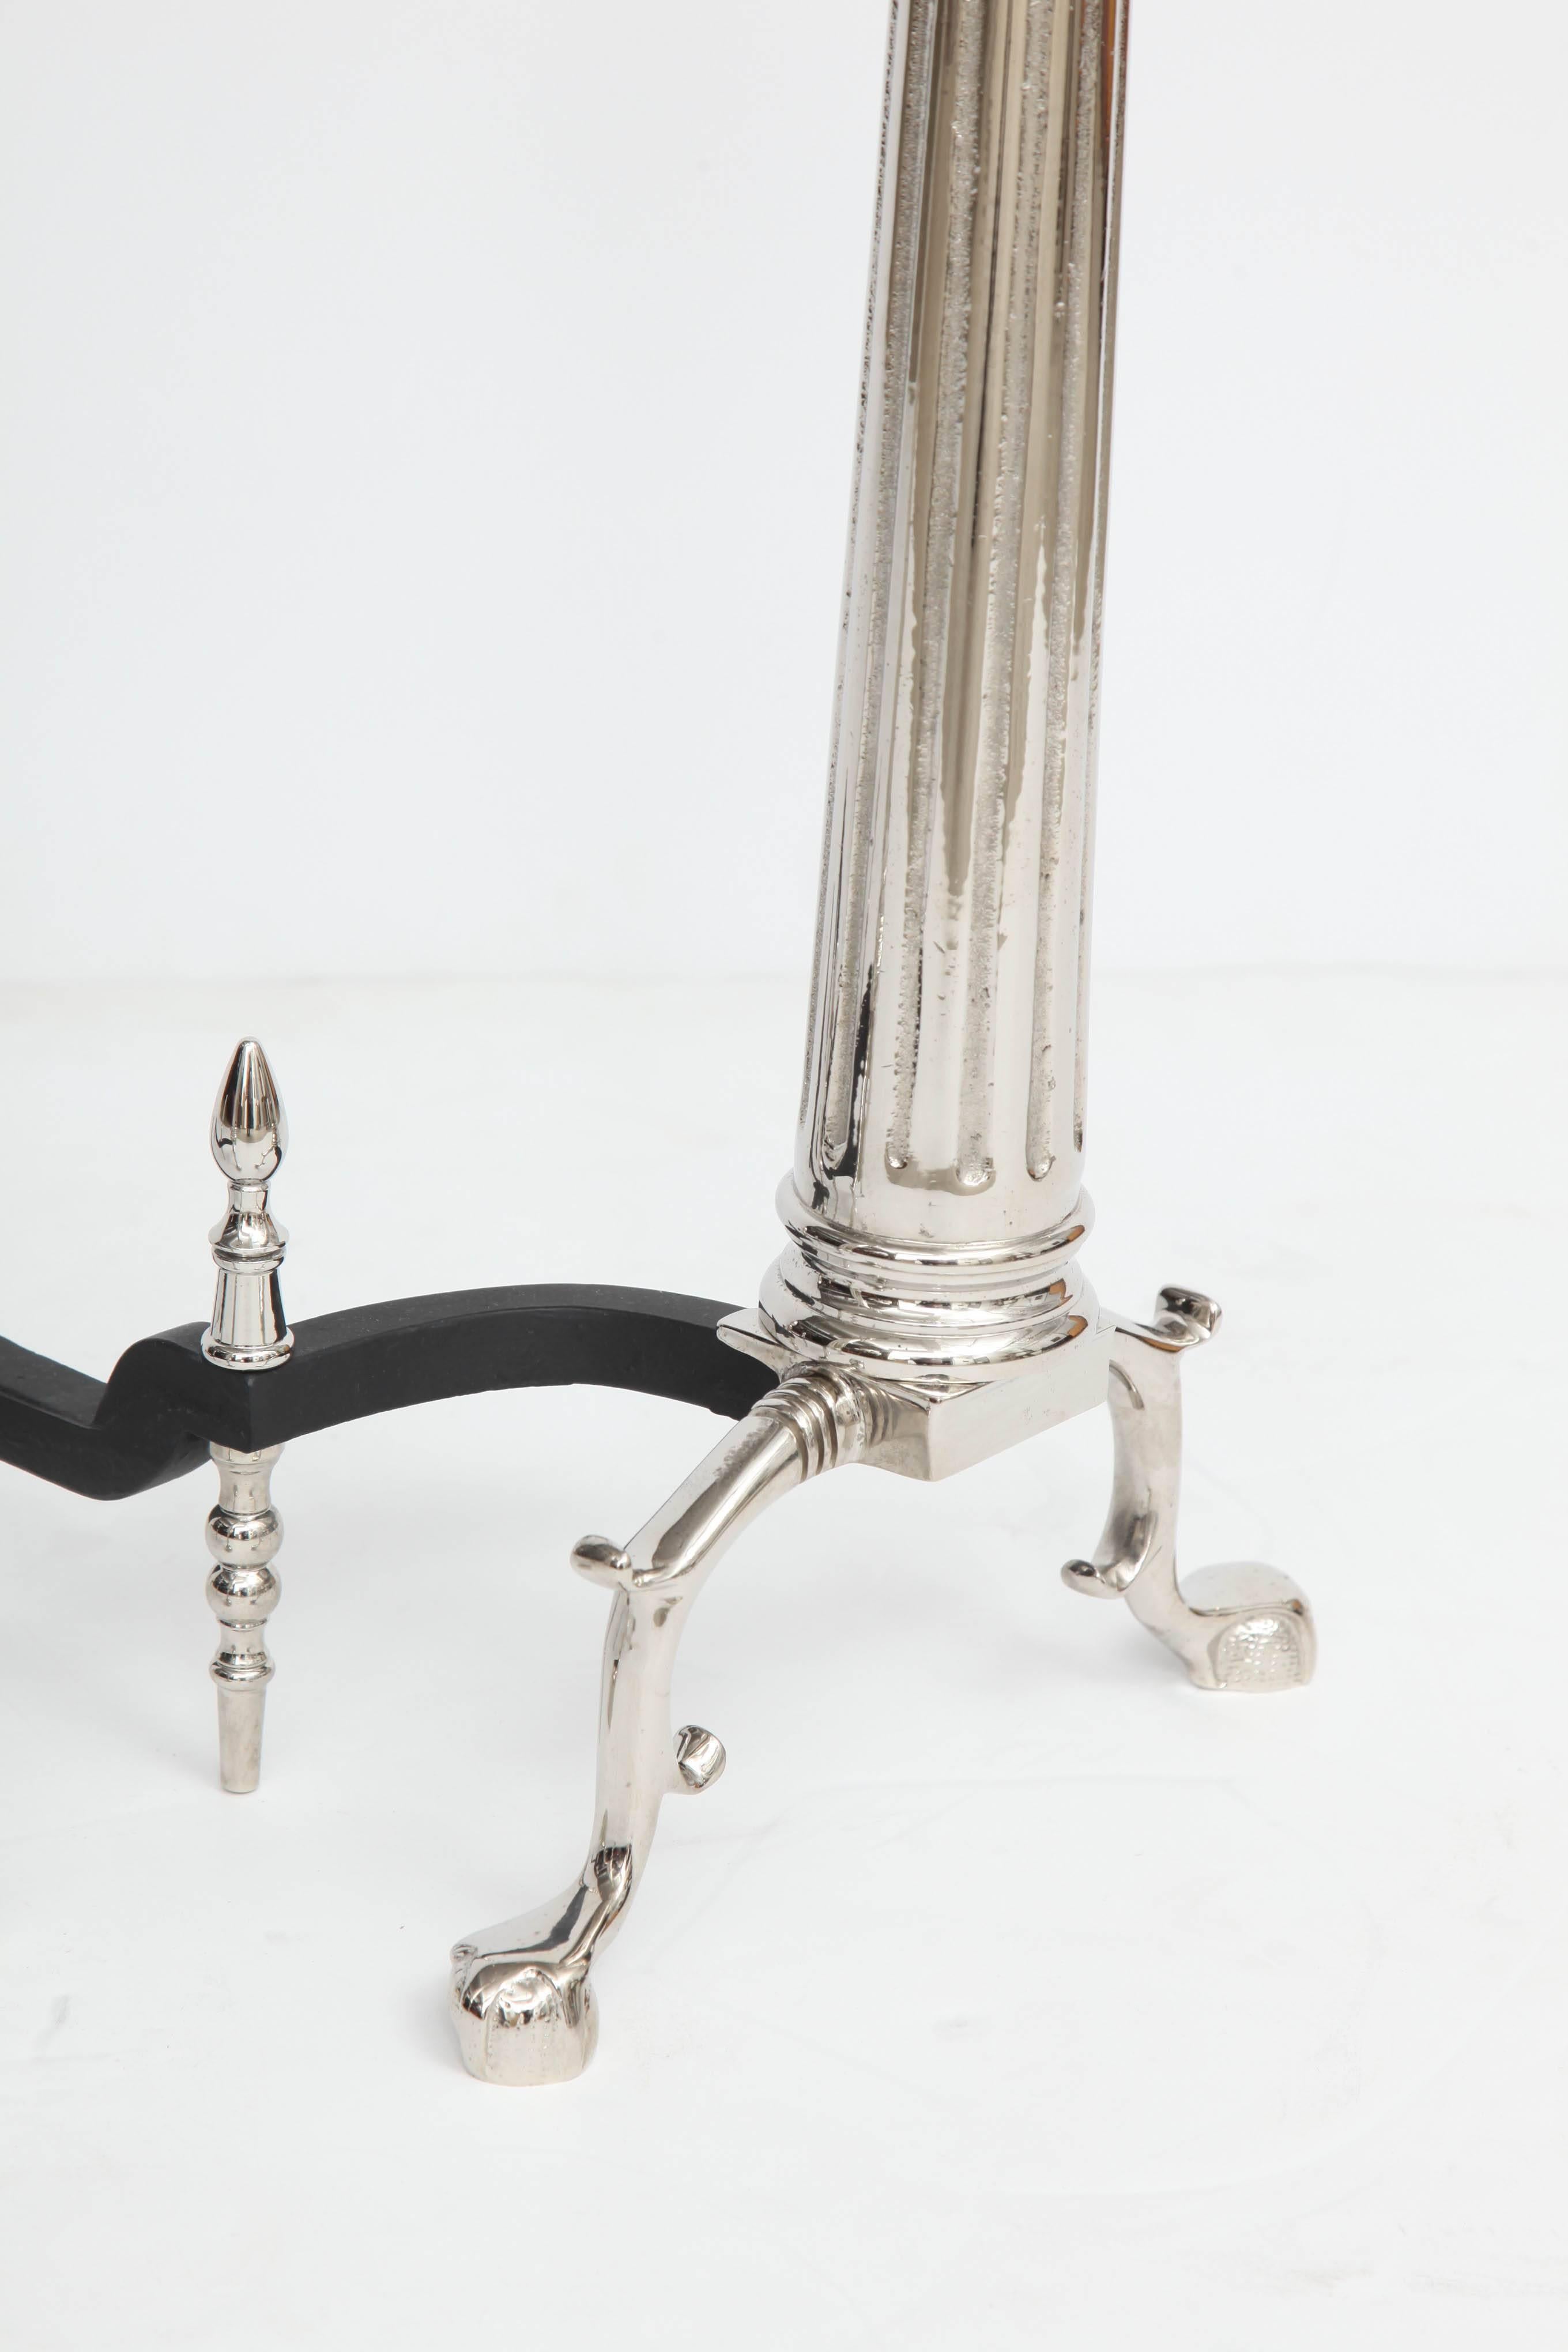 Polished Pair of Art Deco Ionic Column Andirons with Urn Finials